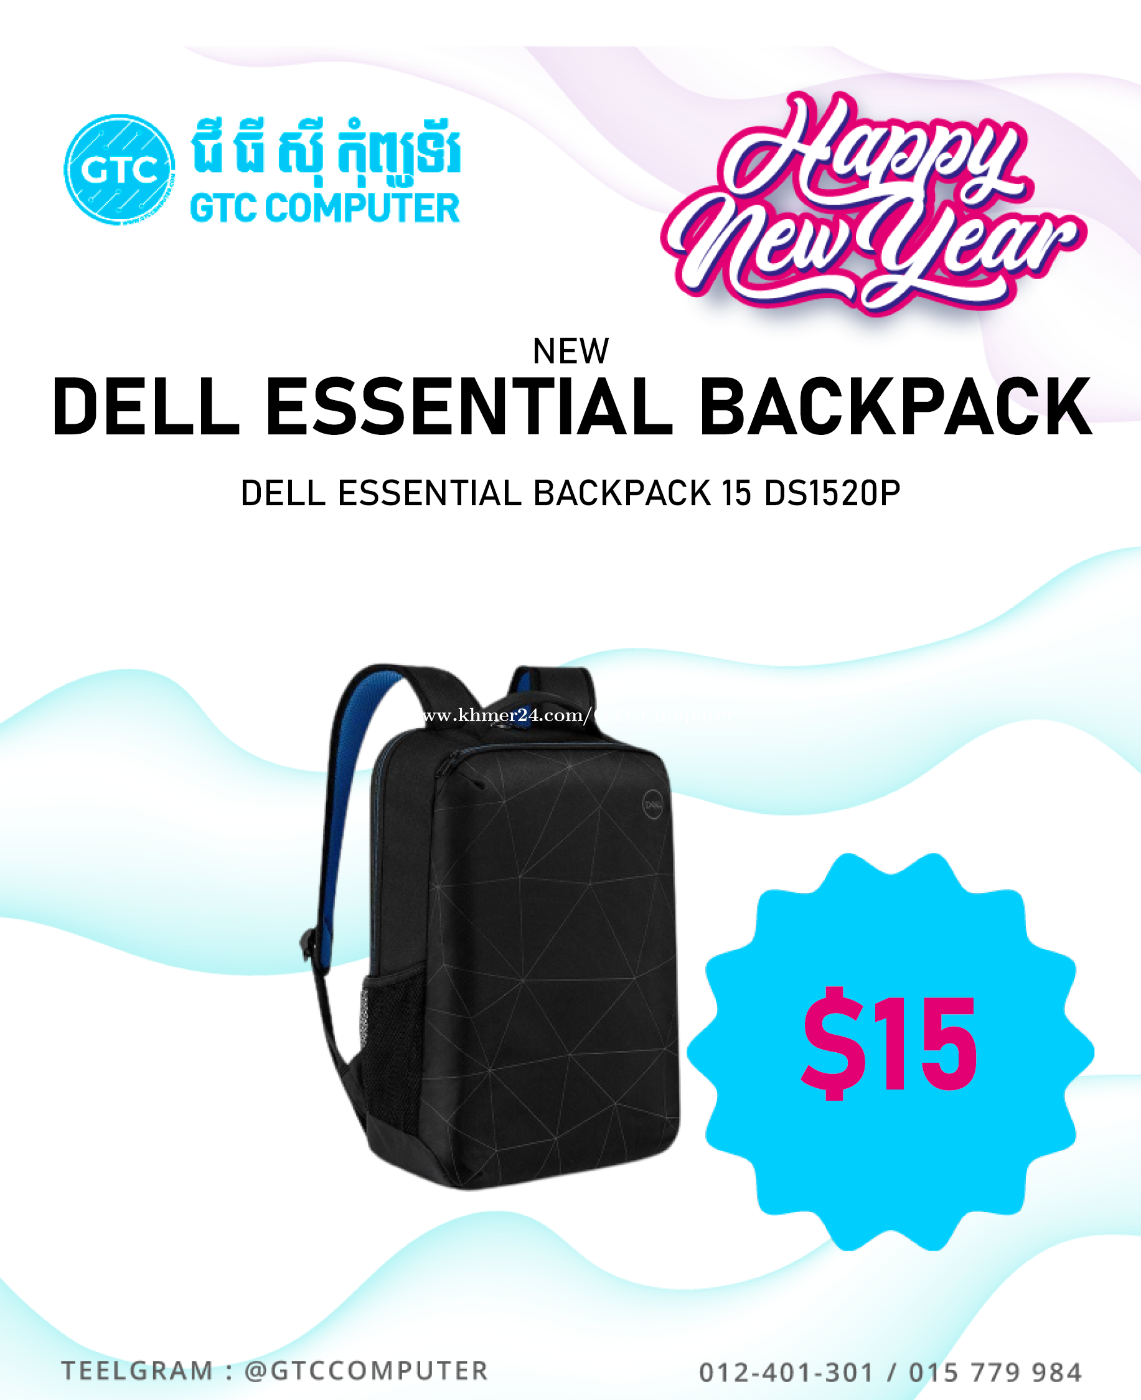 Dell Polyester Black Laptop Bag : Amazon.in: Computers & Accessories